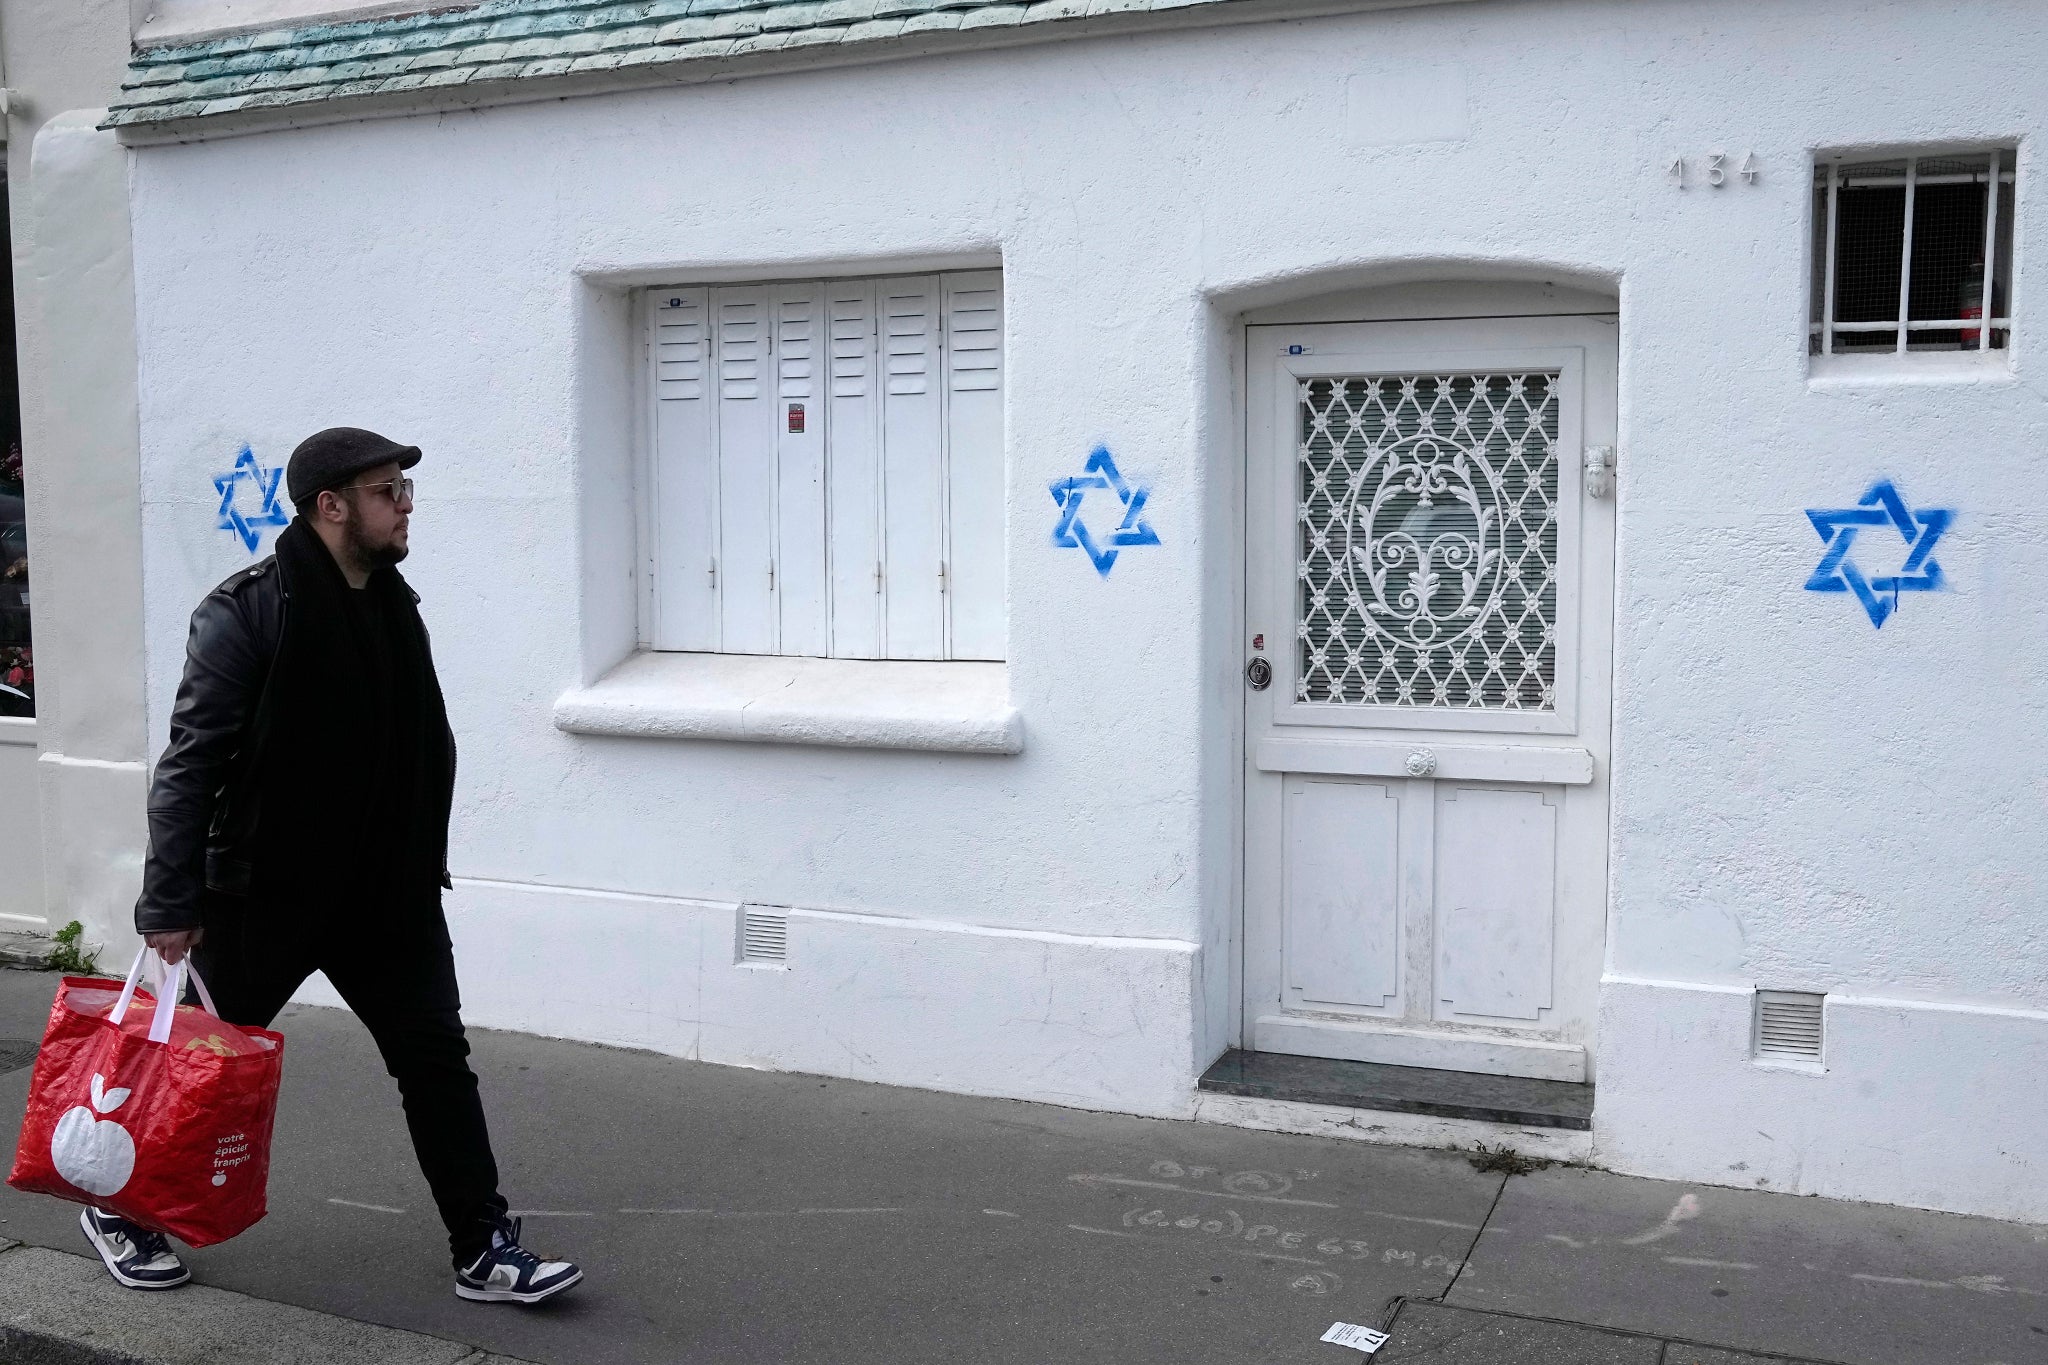 A man walks past Stars of David tagged on a wall in Paris. Paris police chief Laurent Nunez described the graffiti as antisemitic and said police are investigating